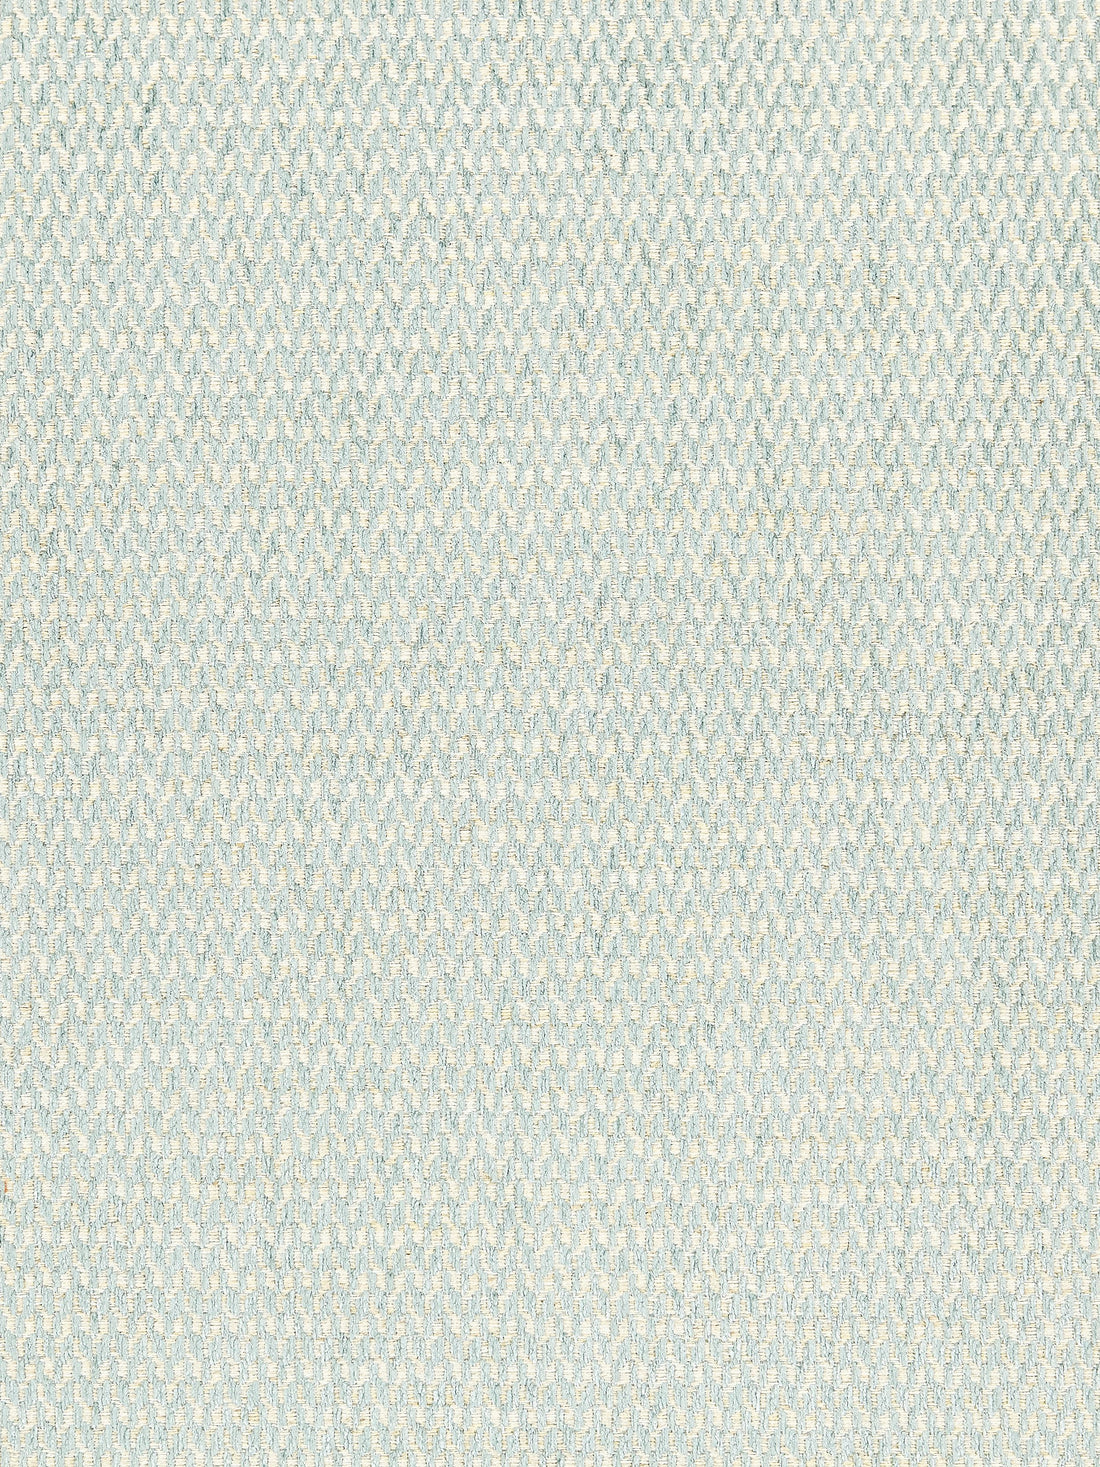 Cortona Chenille fabric in mineral color - pattern number SC 000227104 - by Scalamandre in the Scalamandre Fabrics Book 1 collection